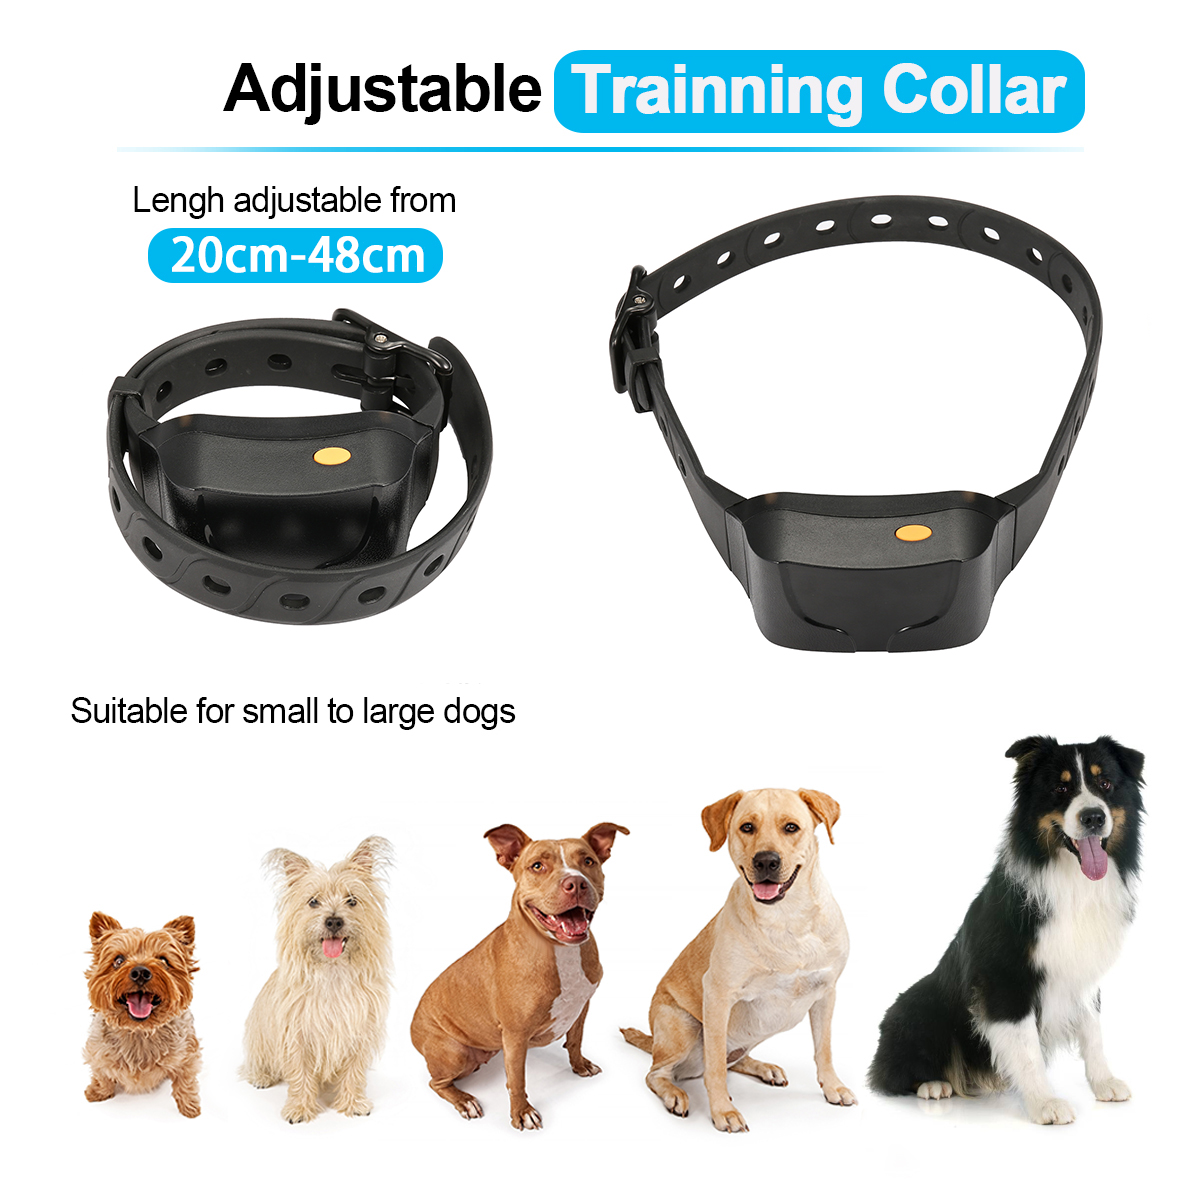 2x-Focuspet-LCD-Electric-Remote-Dog-Shock-Bark-Collar-Trainer-Training-IPX7-1305108-1